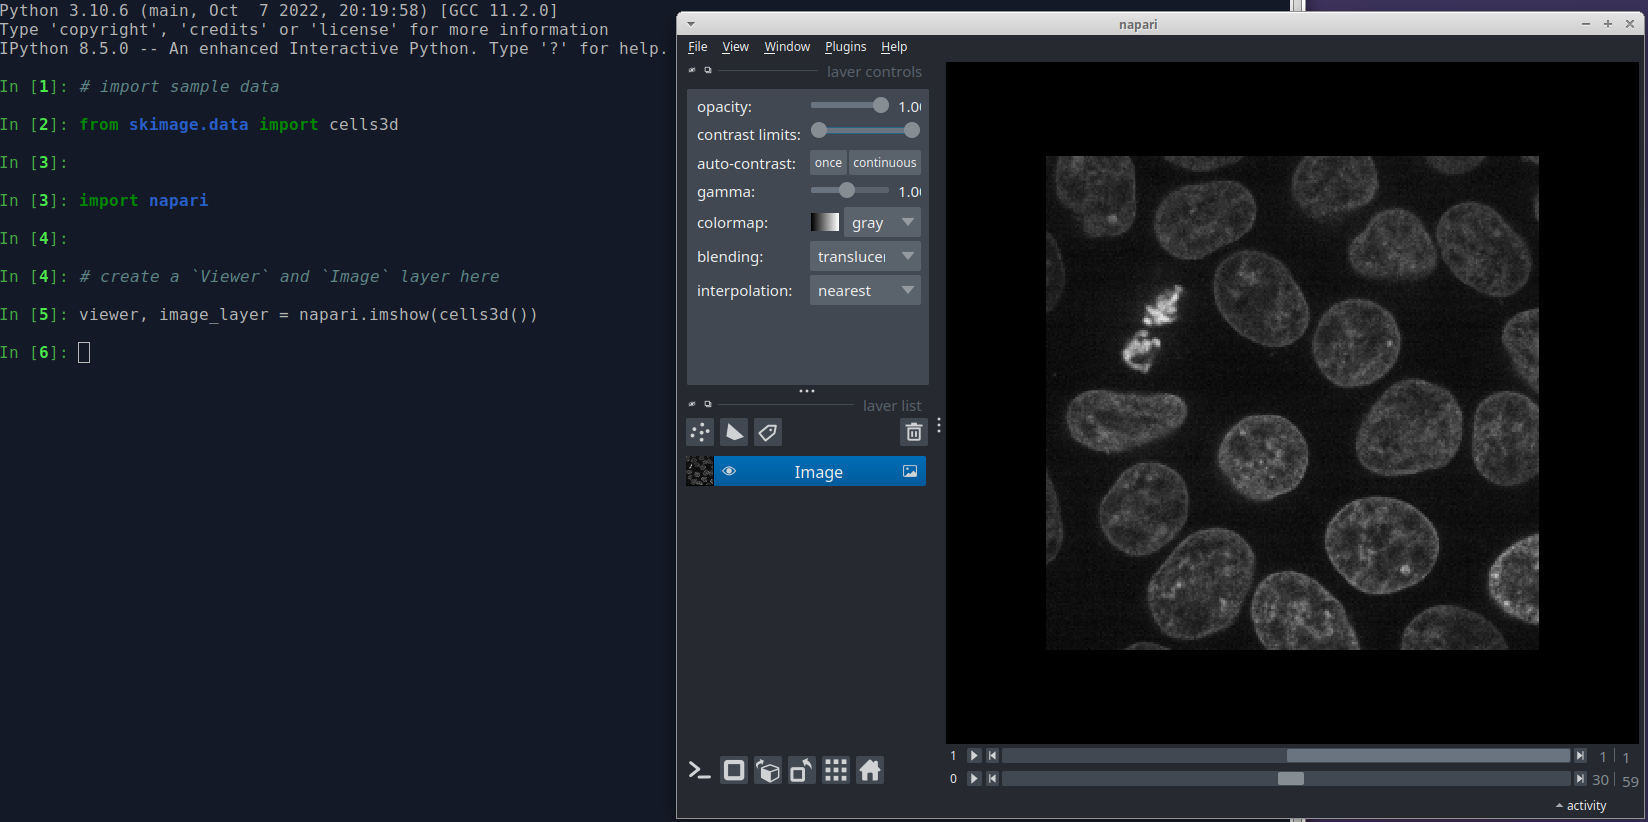 image: napari launched from ipython